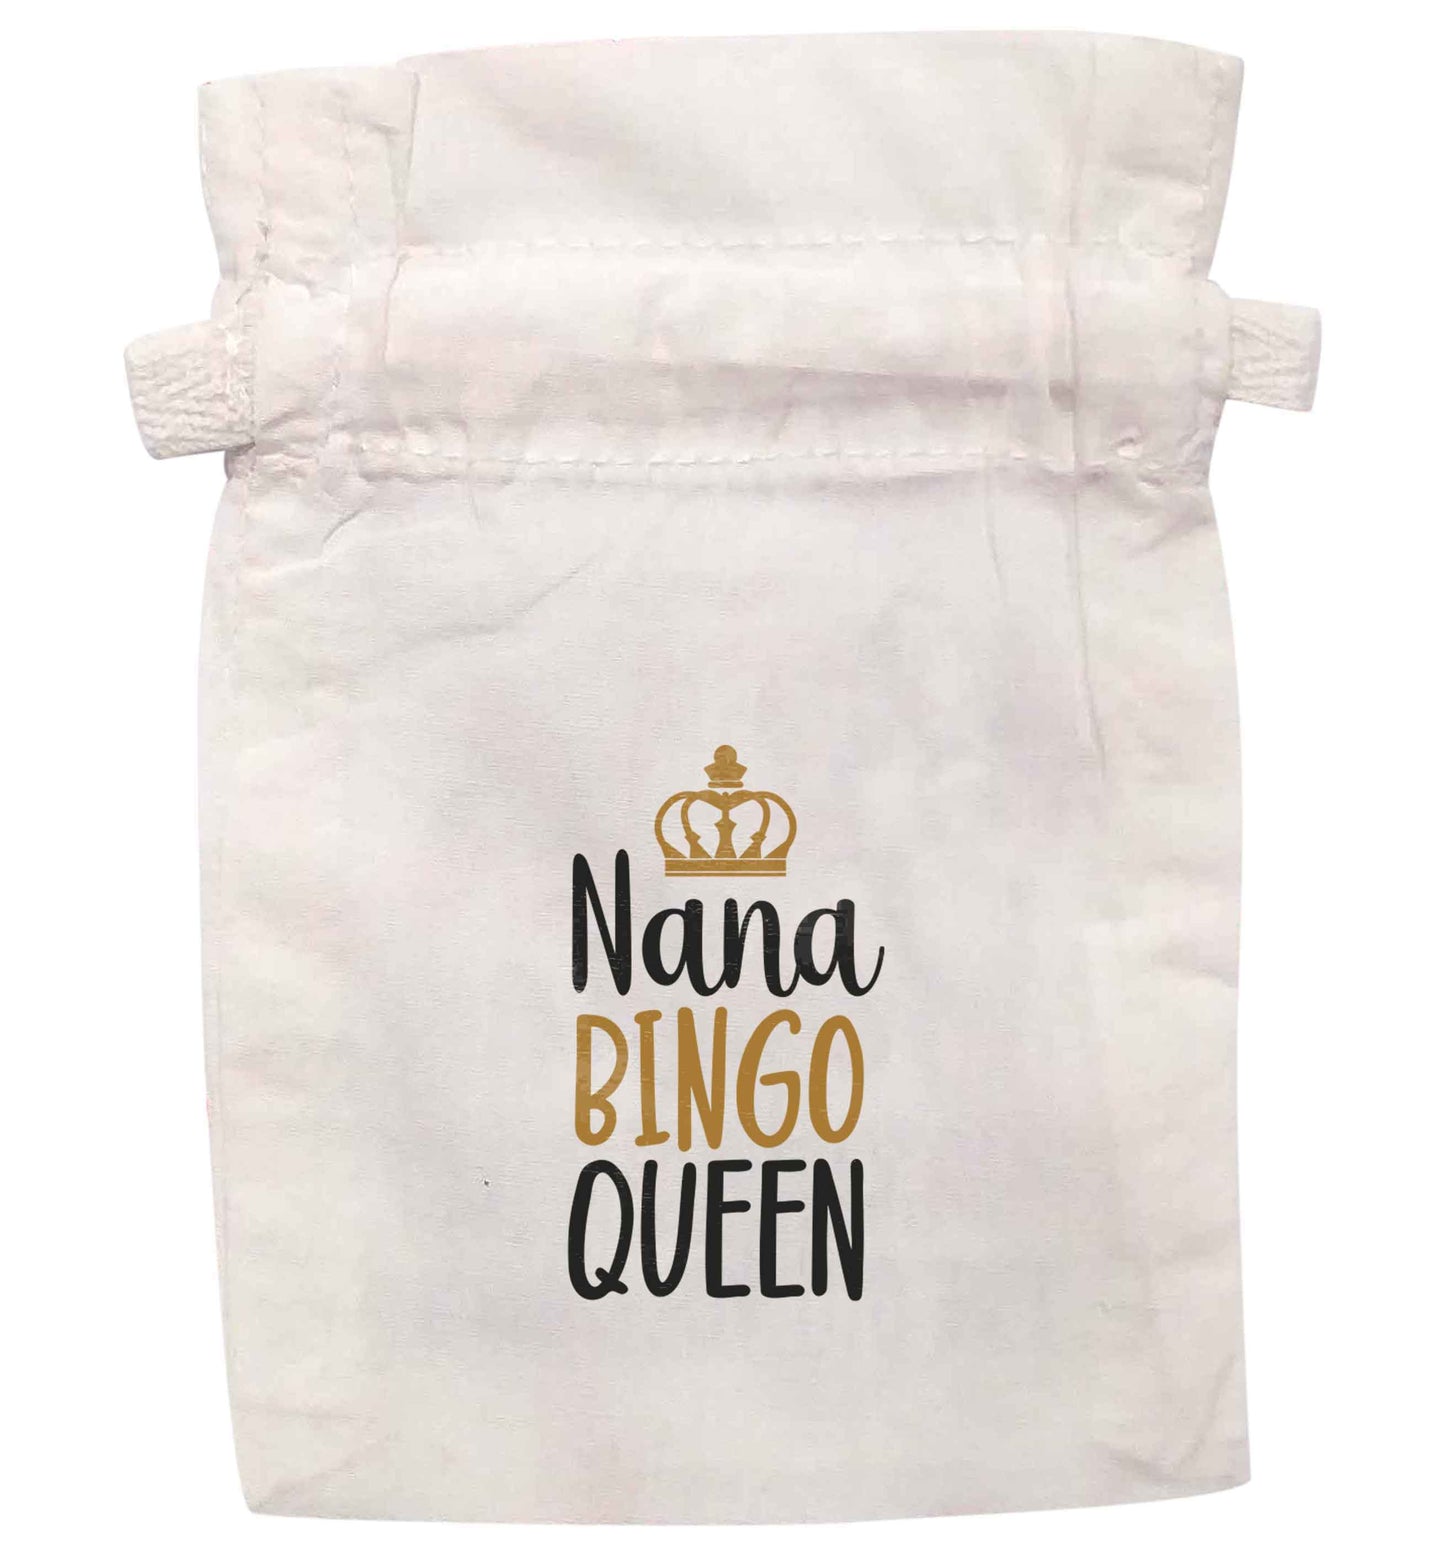 Personalised bingo queen | XS - L | Pouch / Drawstring bag / Sack | Organic Cotton | Bulk discounts available!